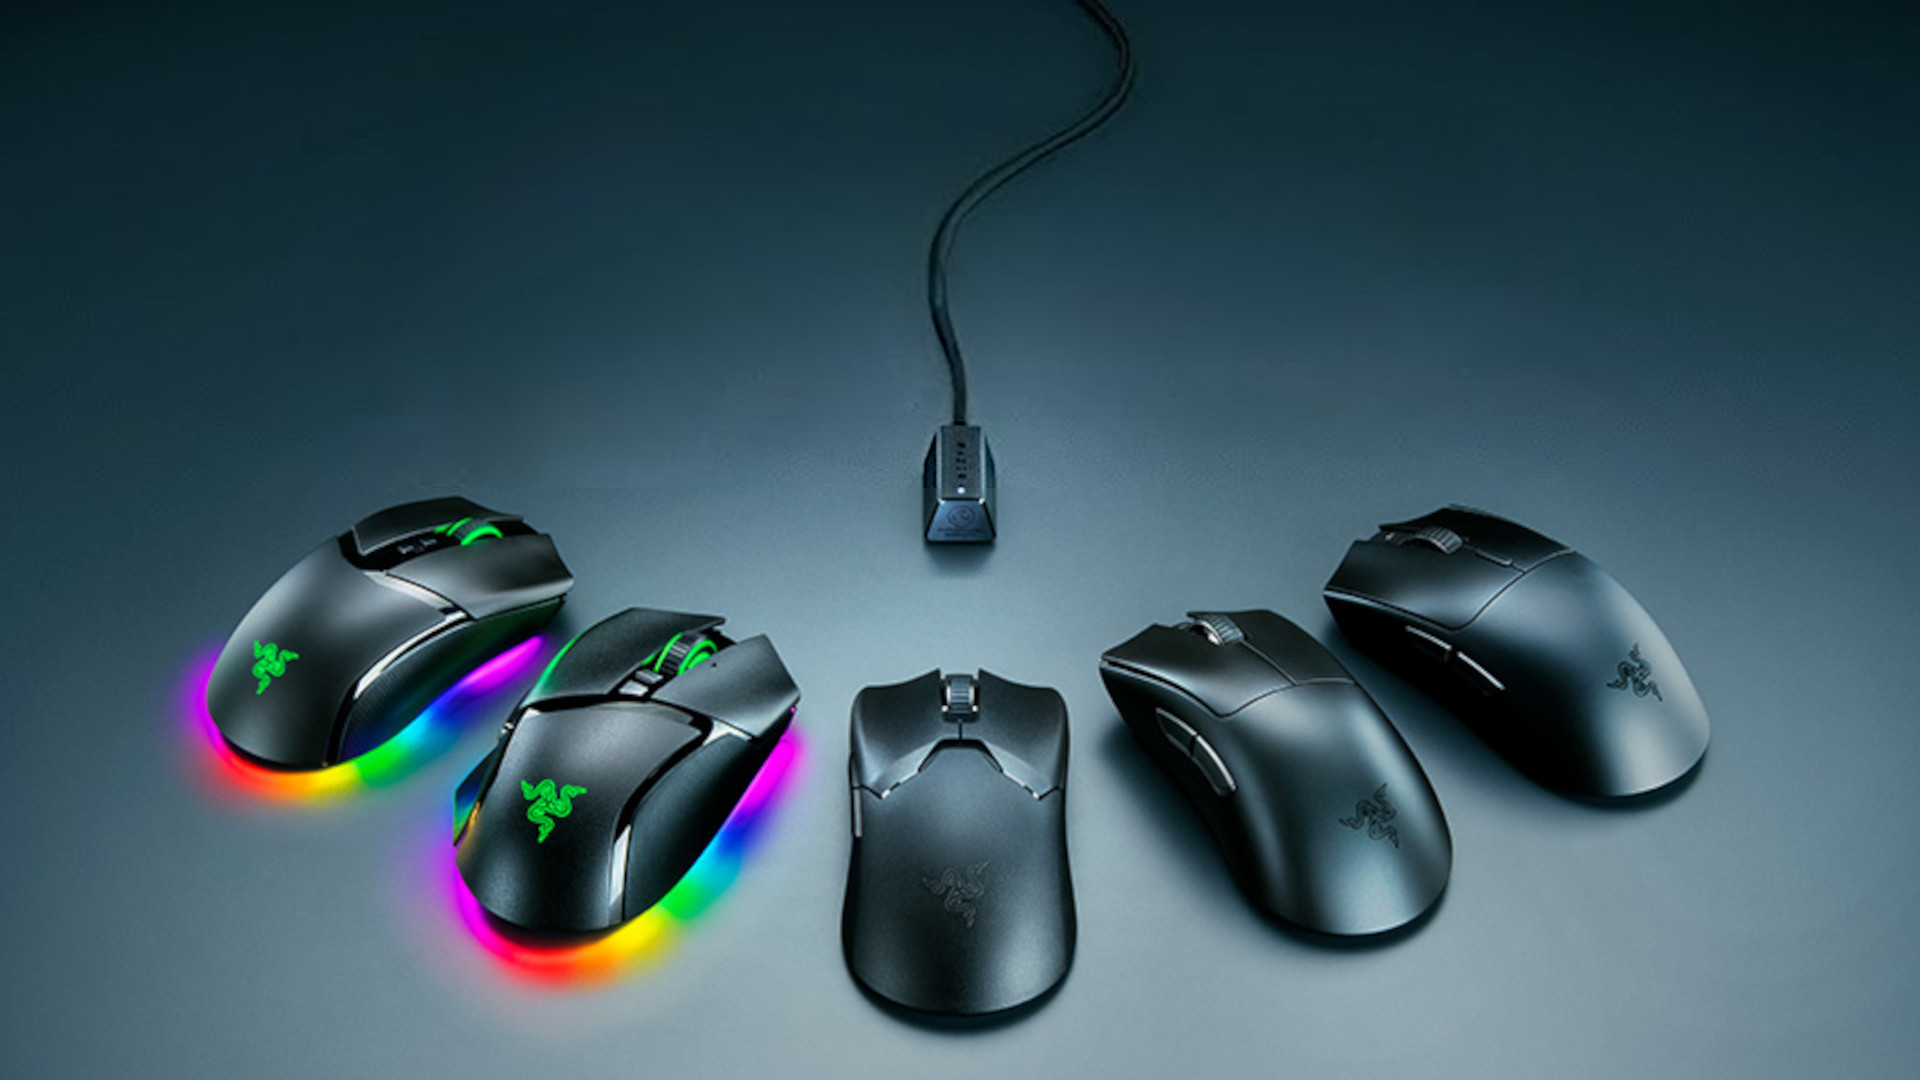 Razer just made some of its wireless gaming mice twice as good, kinda